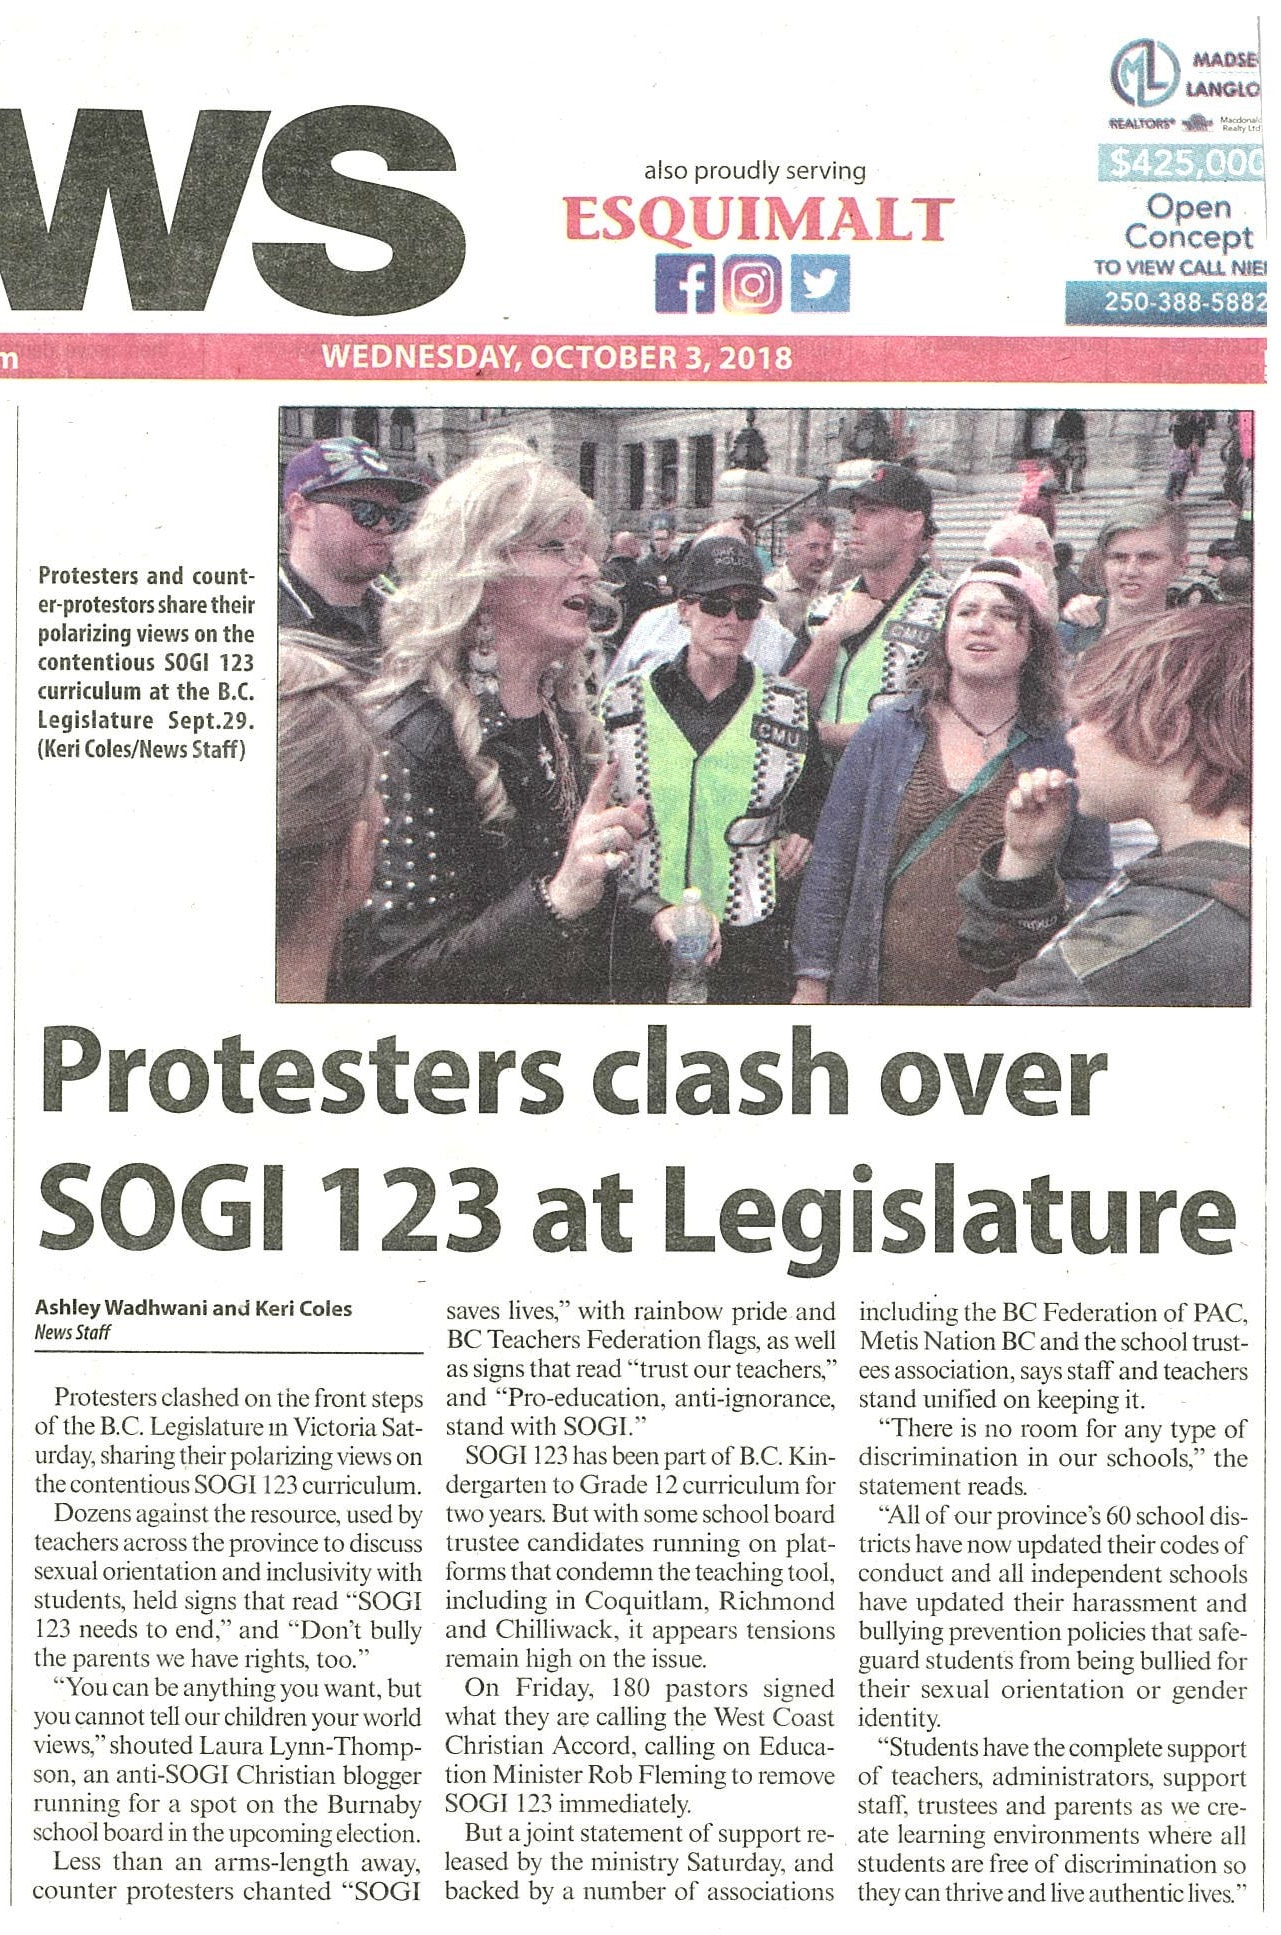 Newspaper clipping with close-up photo of protestors at legislature steps